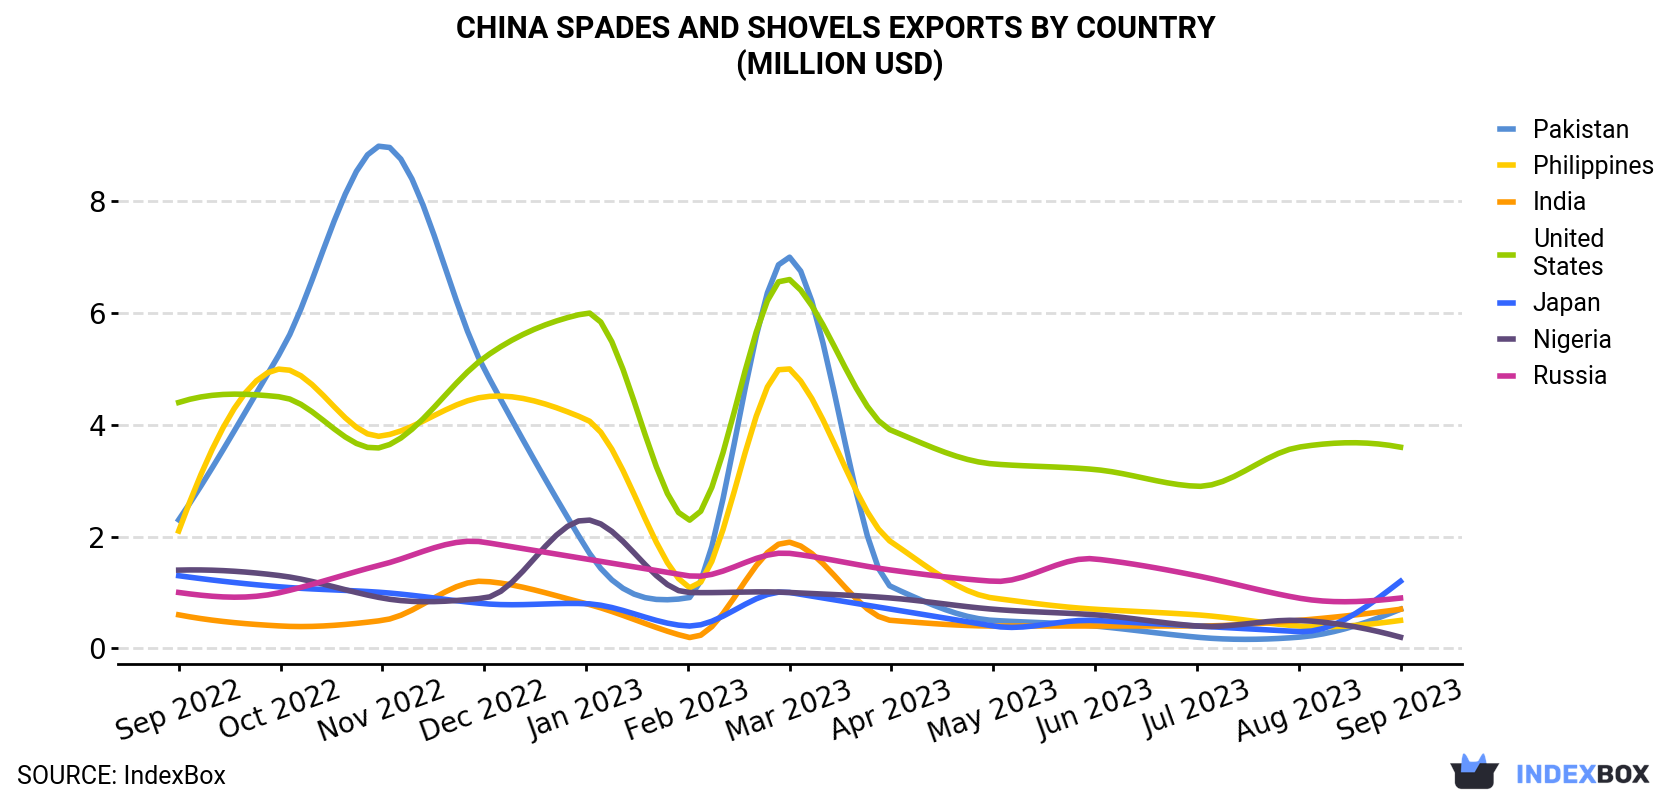 China Spades And Shovels Exports By Country (Million USD)